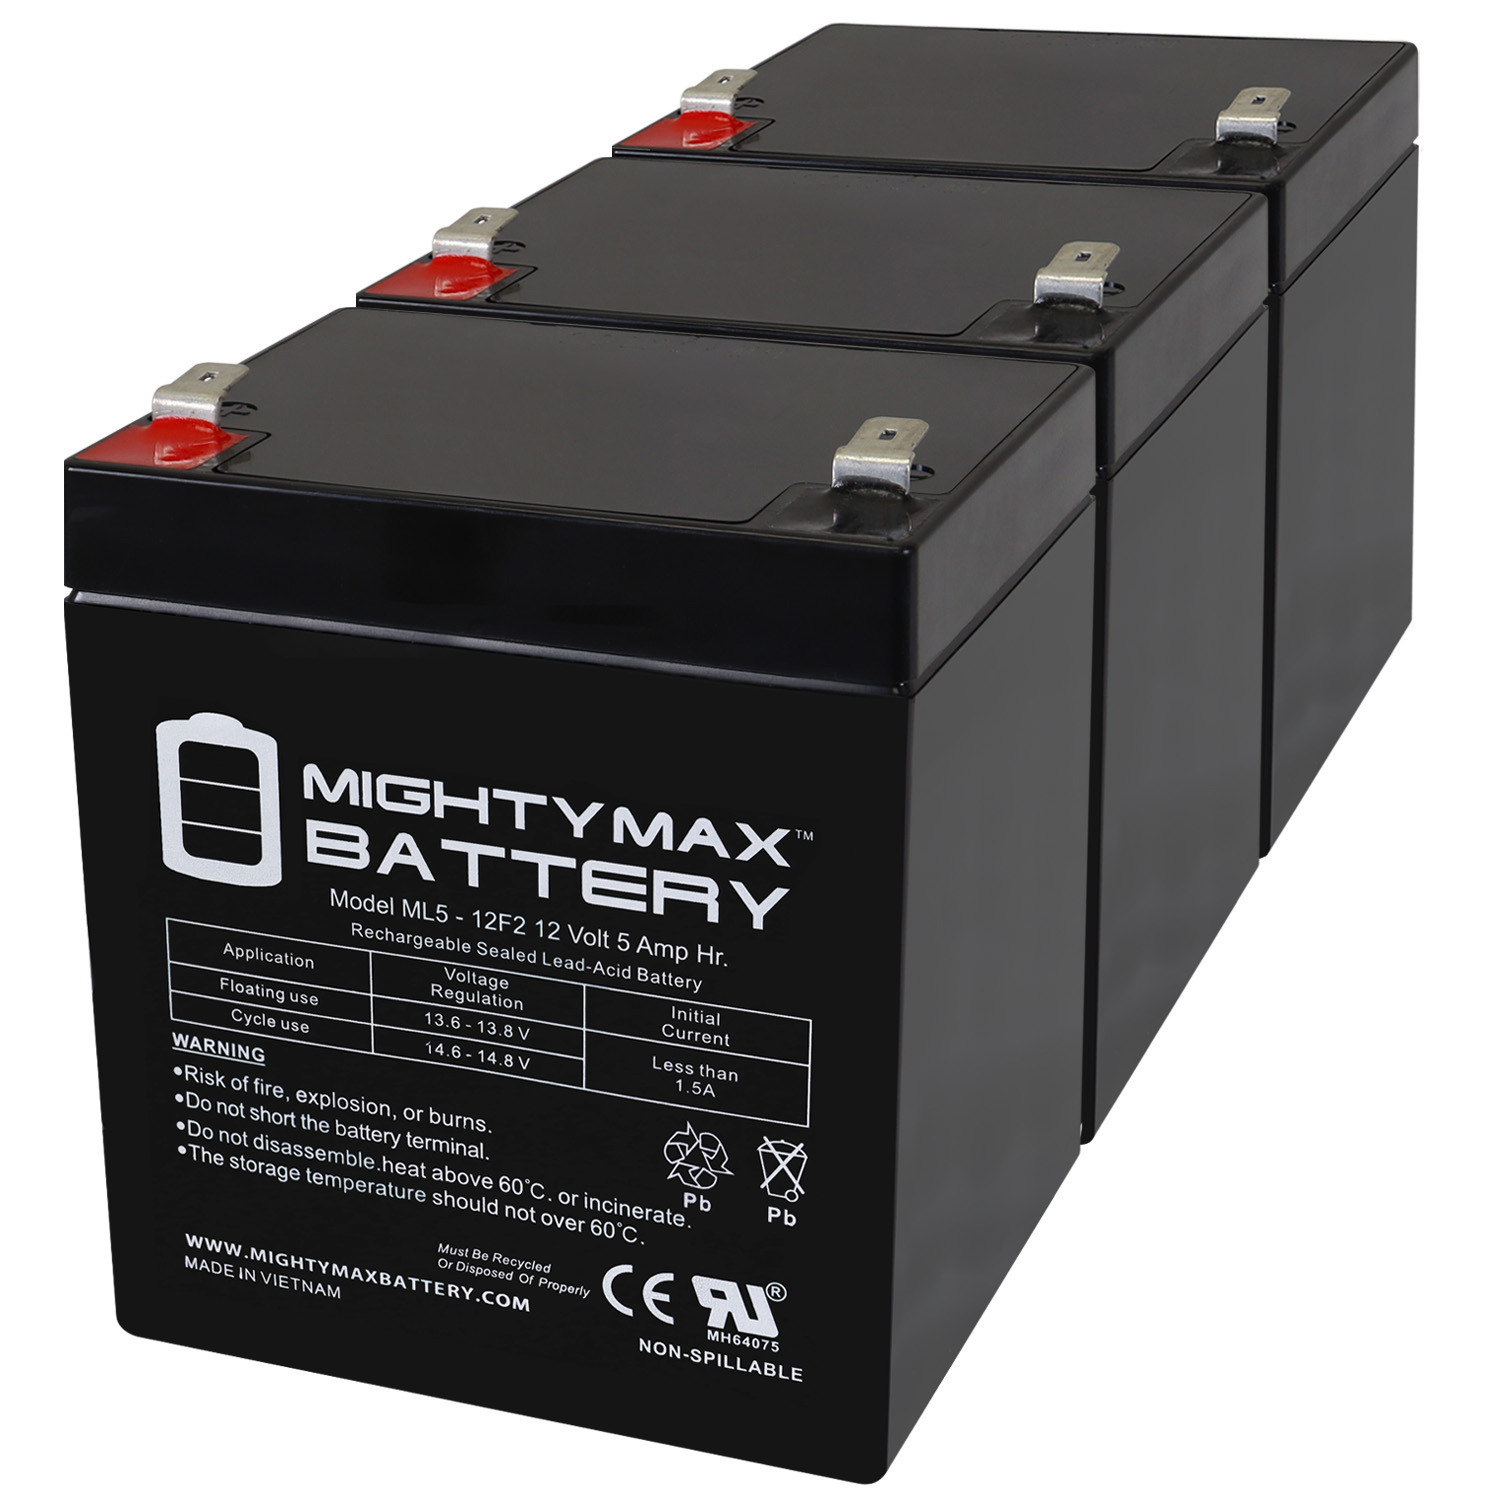 12V 5Ah F2 SLA Replacement Battery for Tripp Lite BCPERS280 - 3 Pack